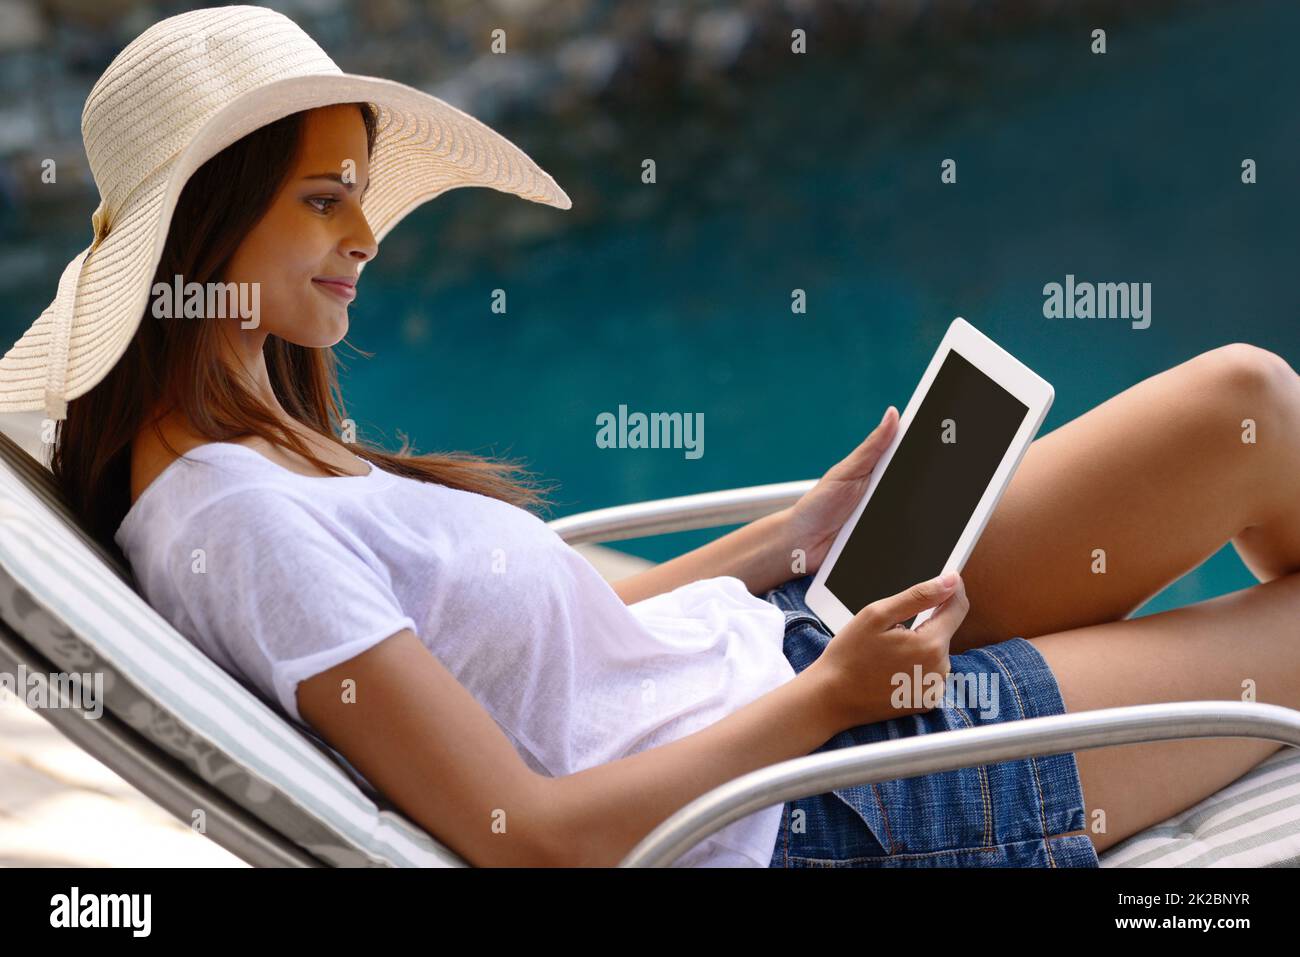 Doing some outdoor browsing. Shot of an attractive young woman using a digital tablet by the poolside. Stock Photo